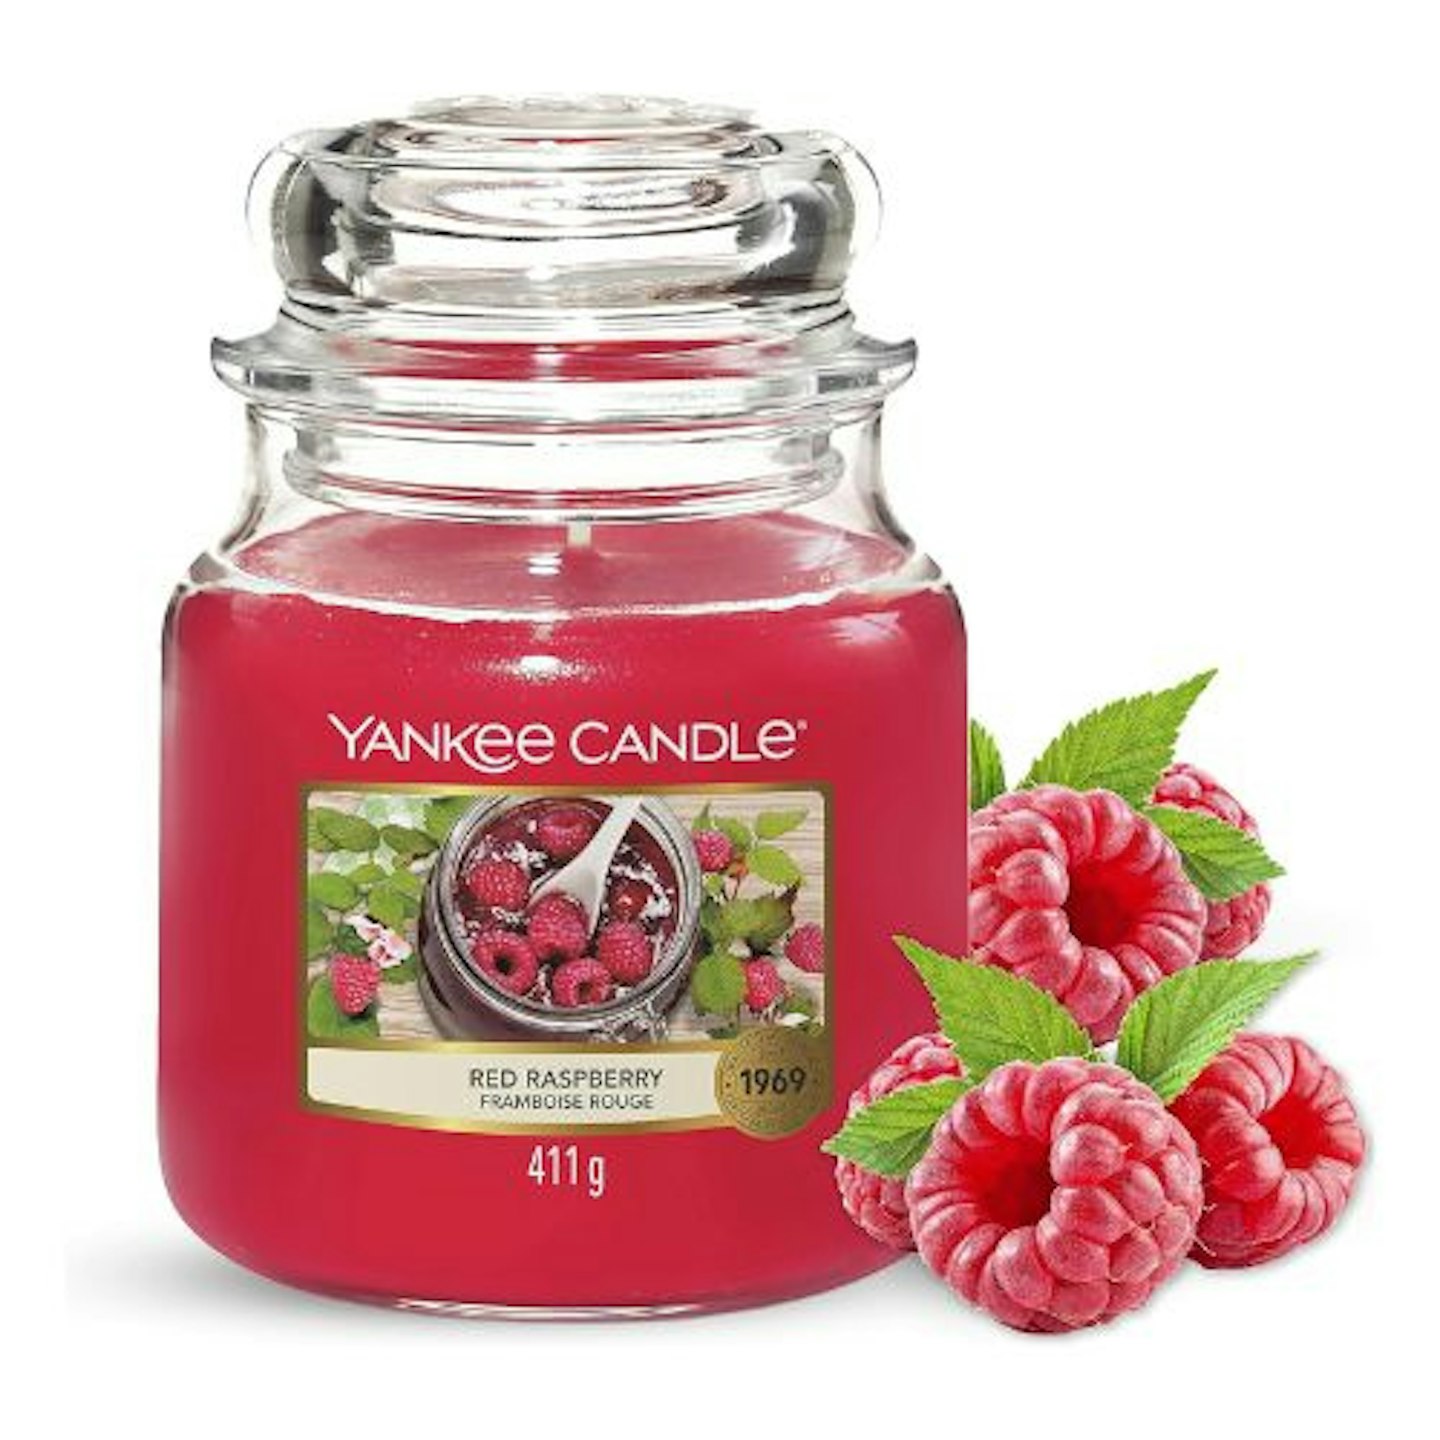 Yankee Candle Scented Candle | Red Raspberry Medium Jar Candle| Burn Time: Up to 75 Hours